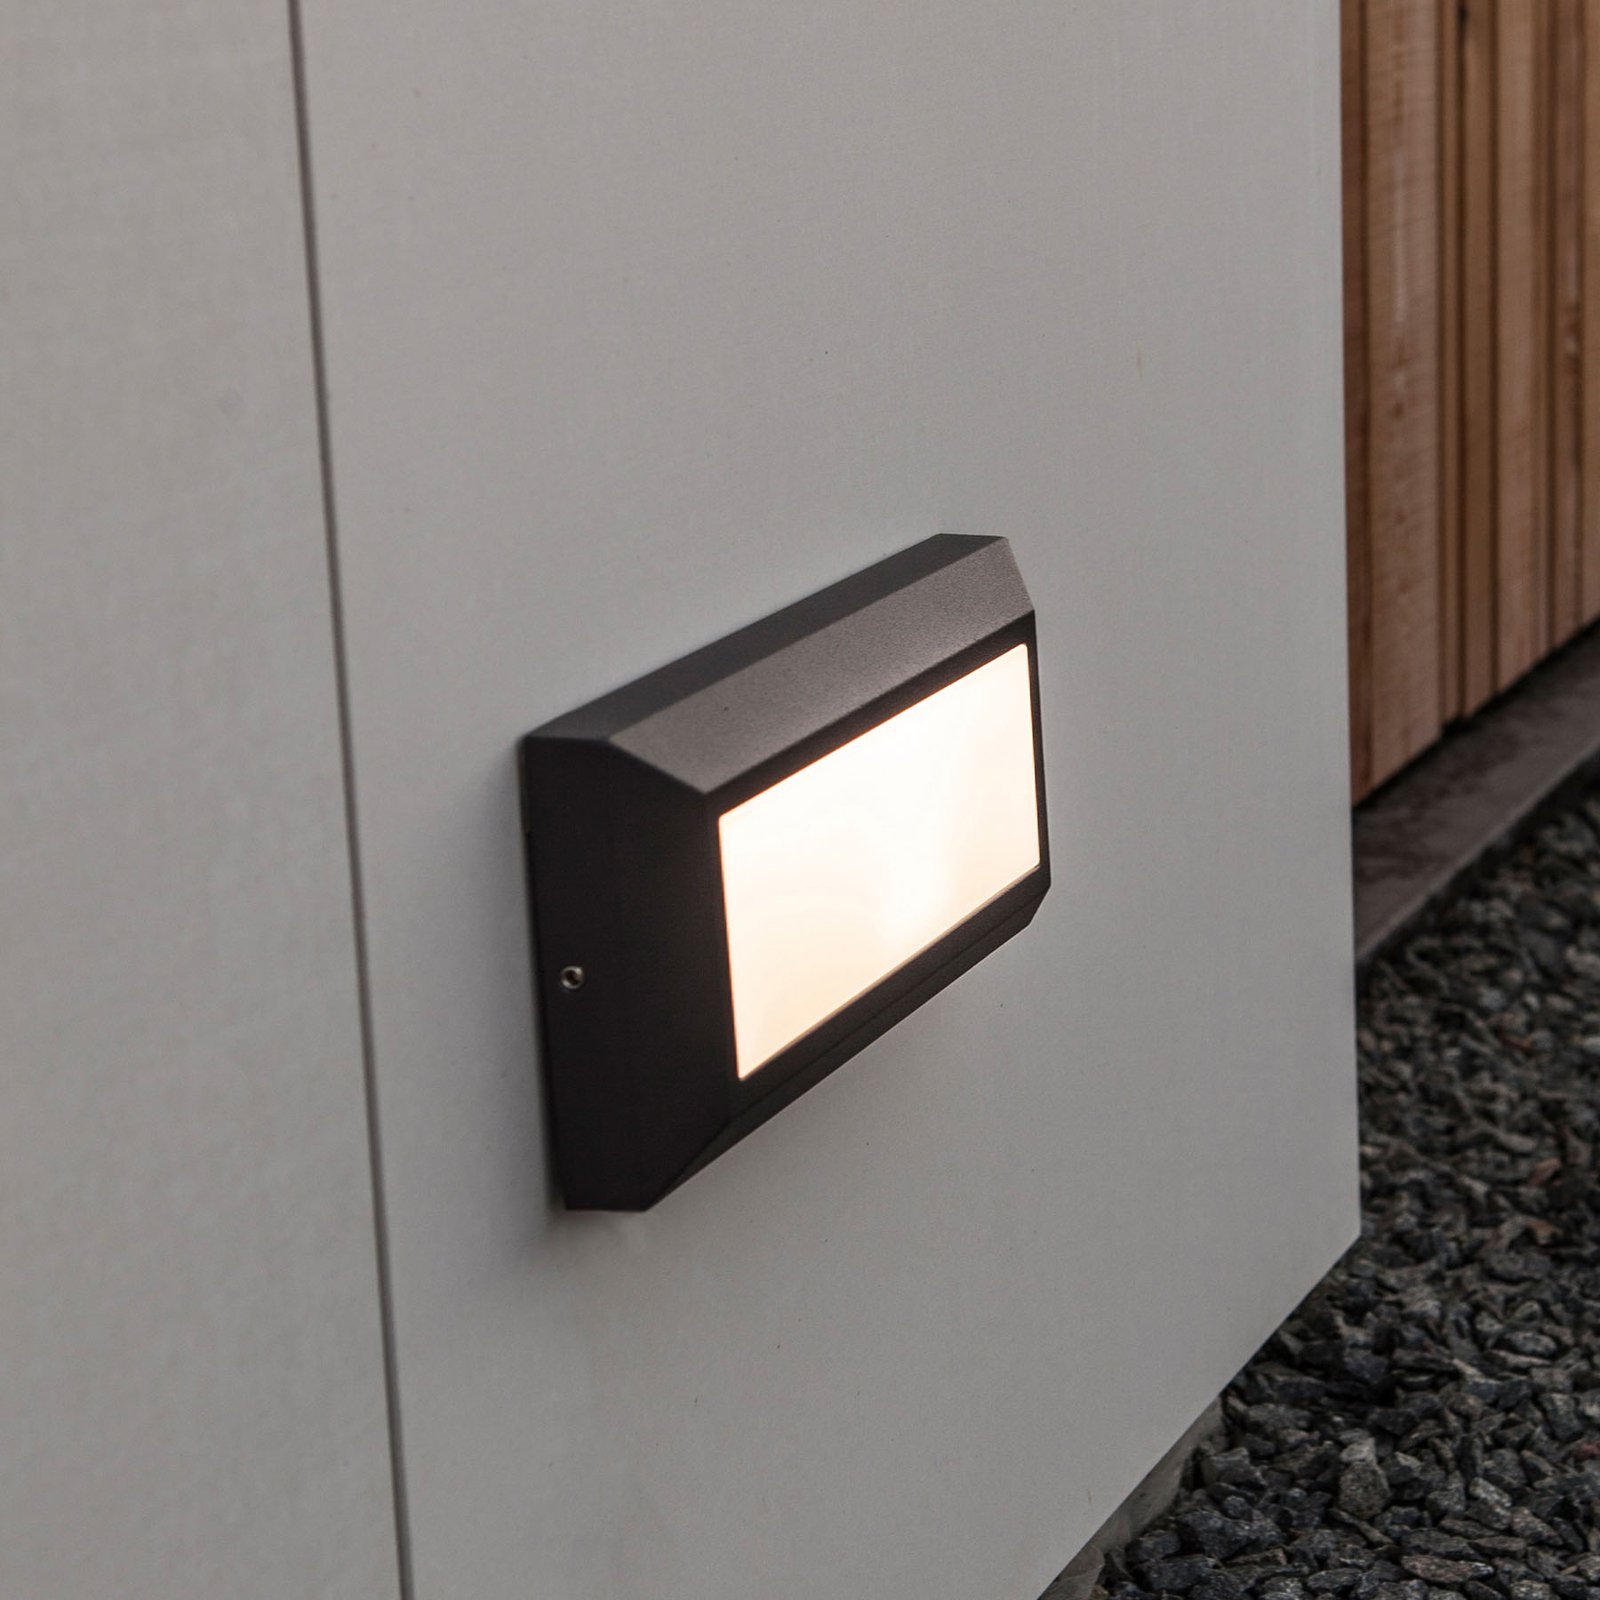 Applique LED Helena, frontale 23 cm anthracite